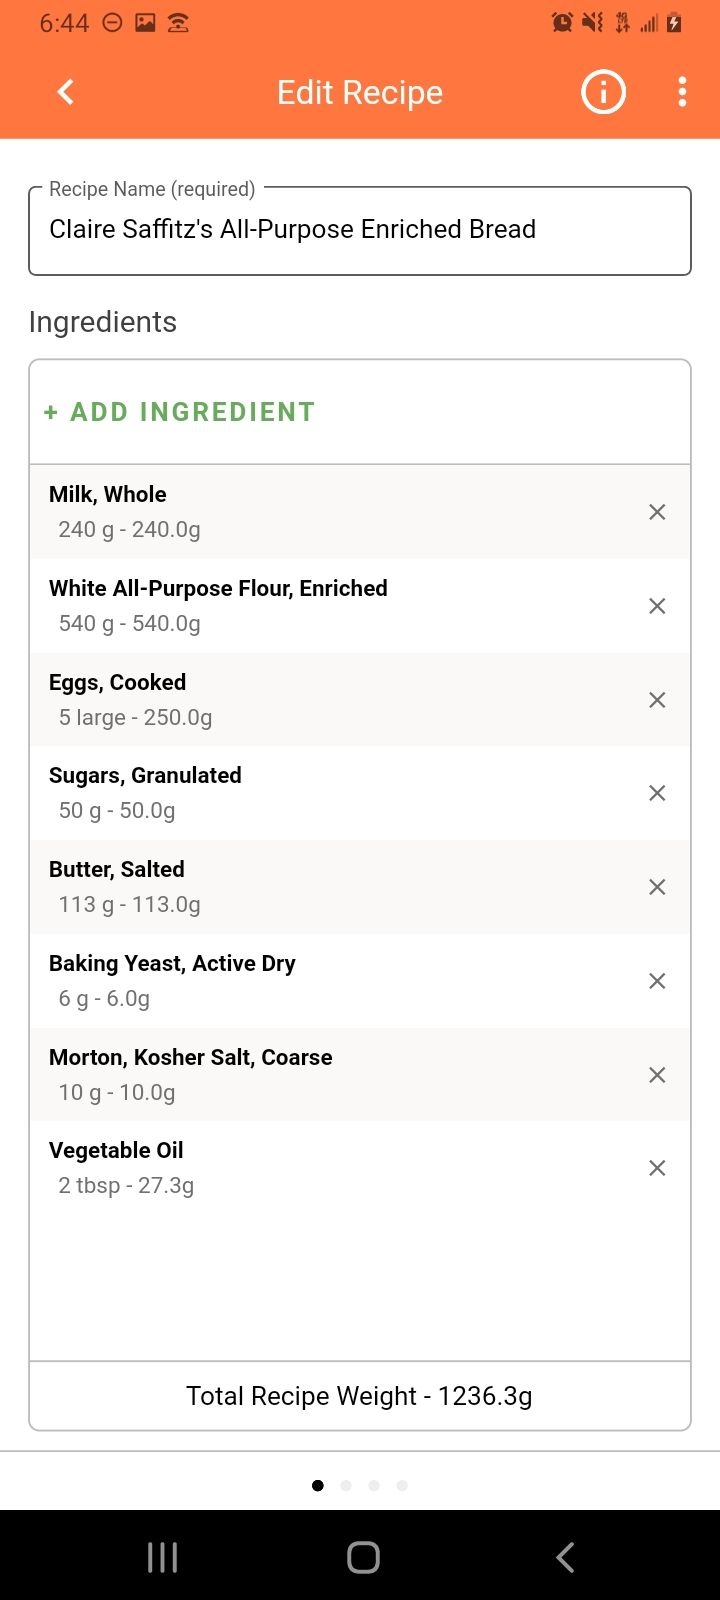 The list of ingredients in our recipe